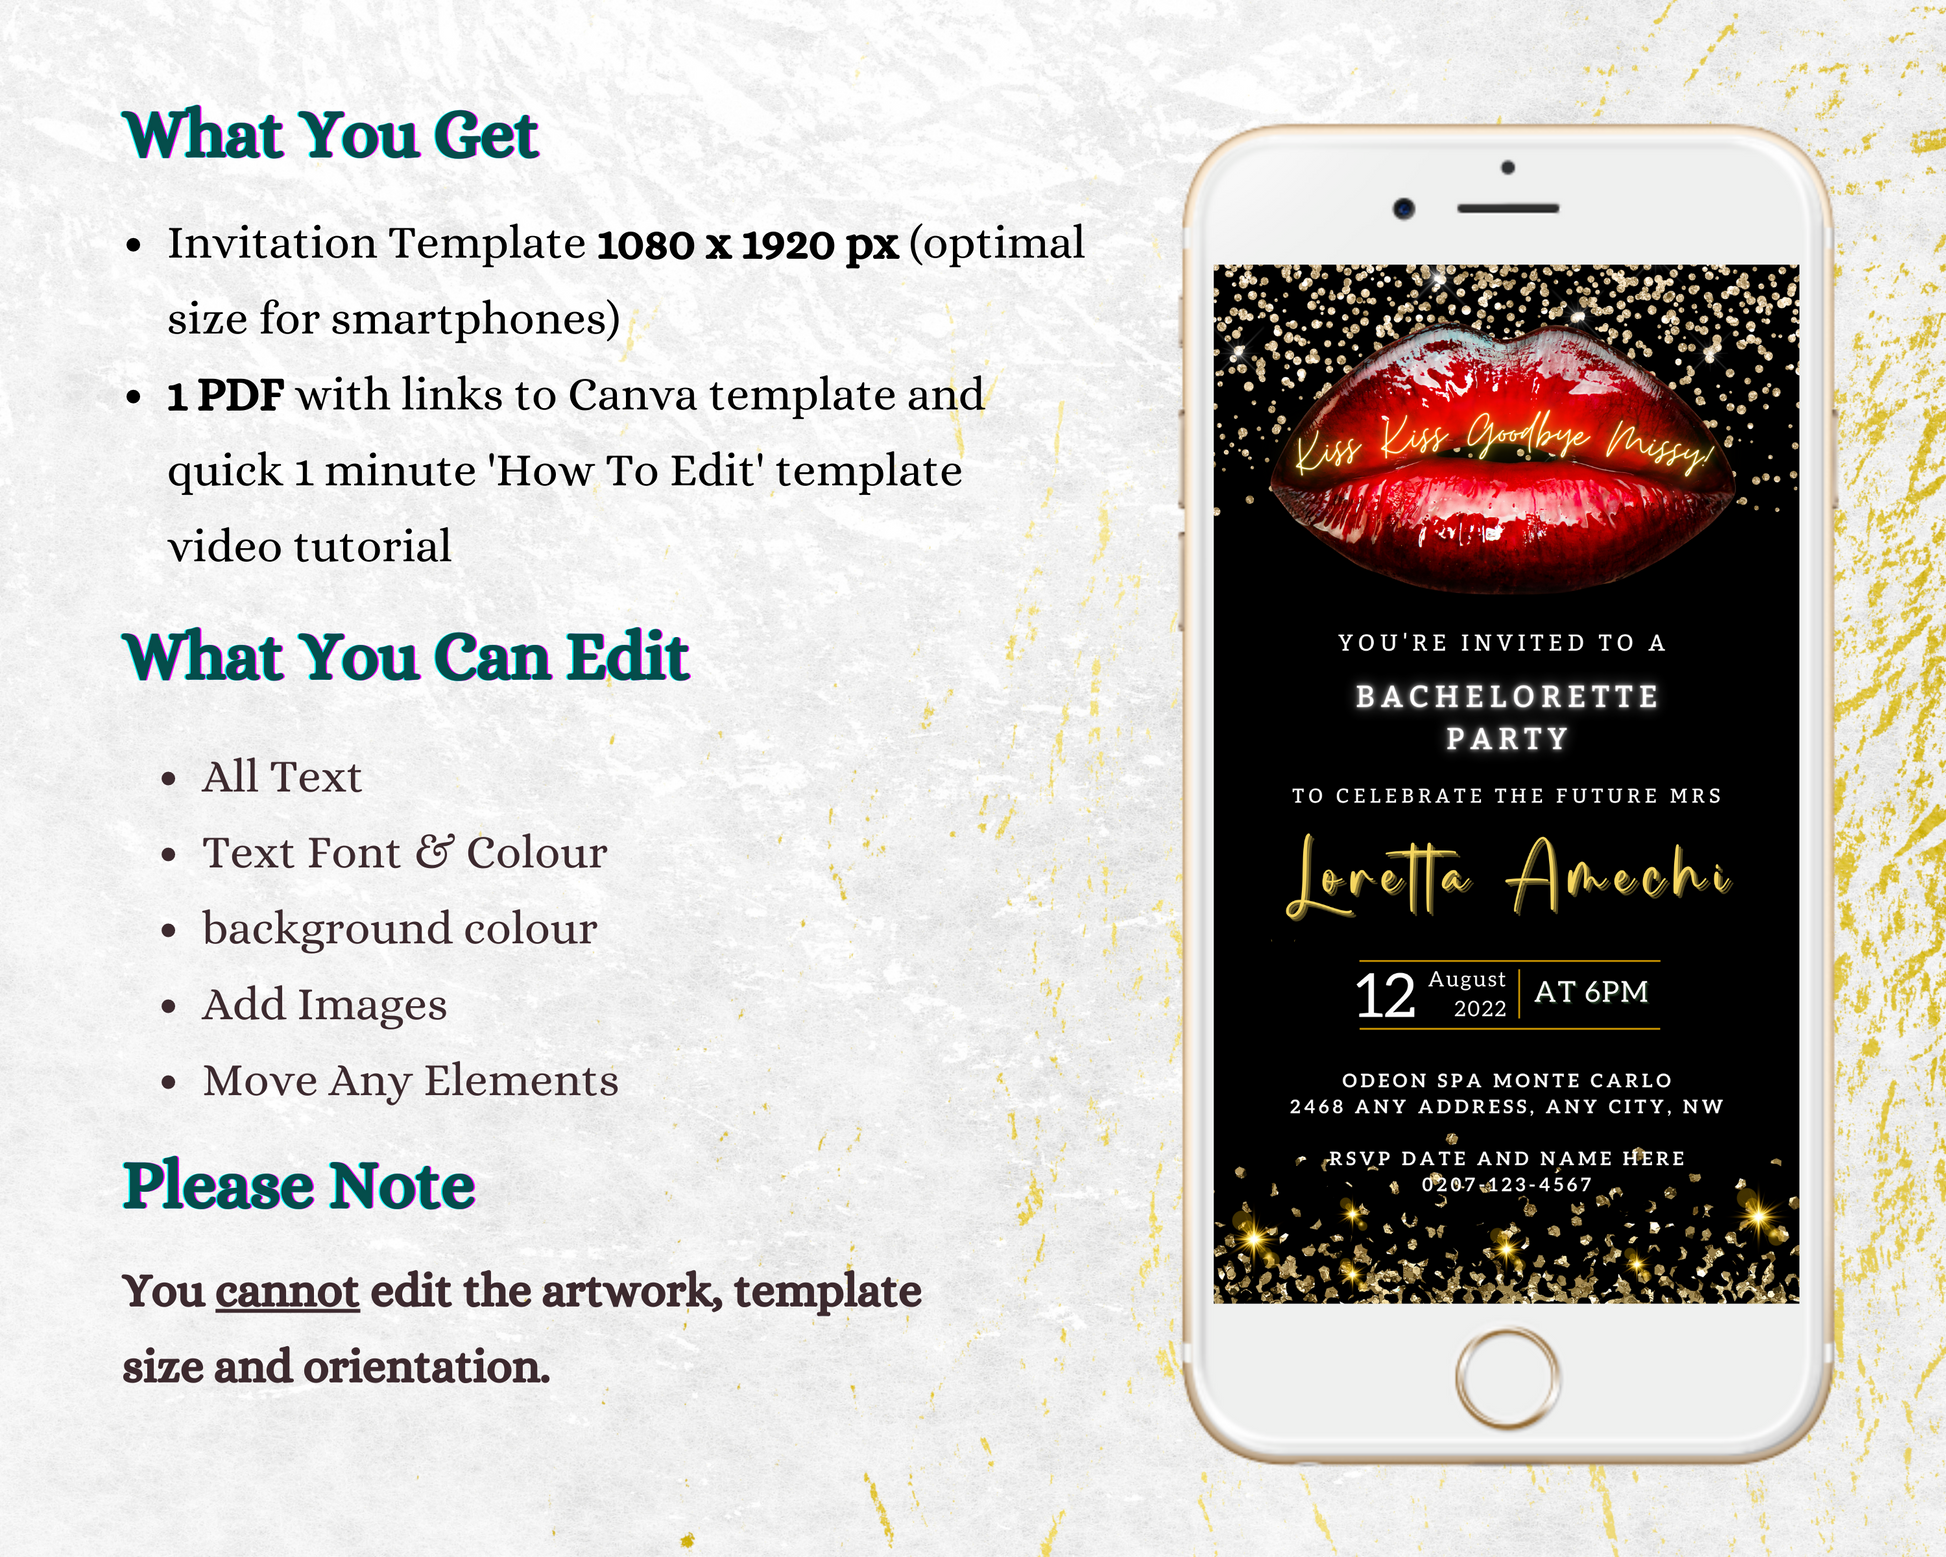 Customizable digital bachelorette party invitation featuring hot red lips and gold glitter, displayed on a smartphone screen with editable text and elements.